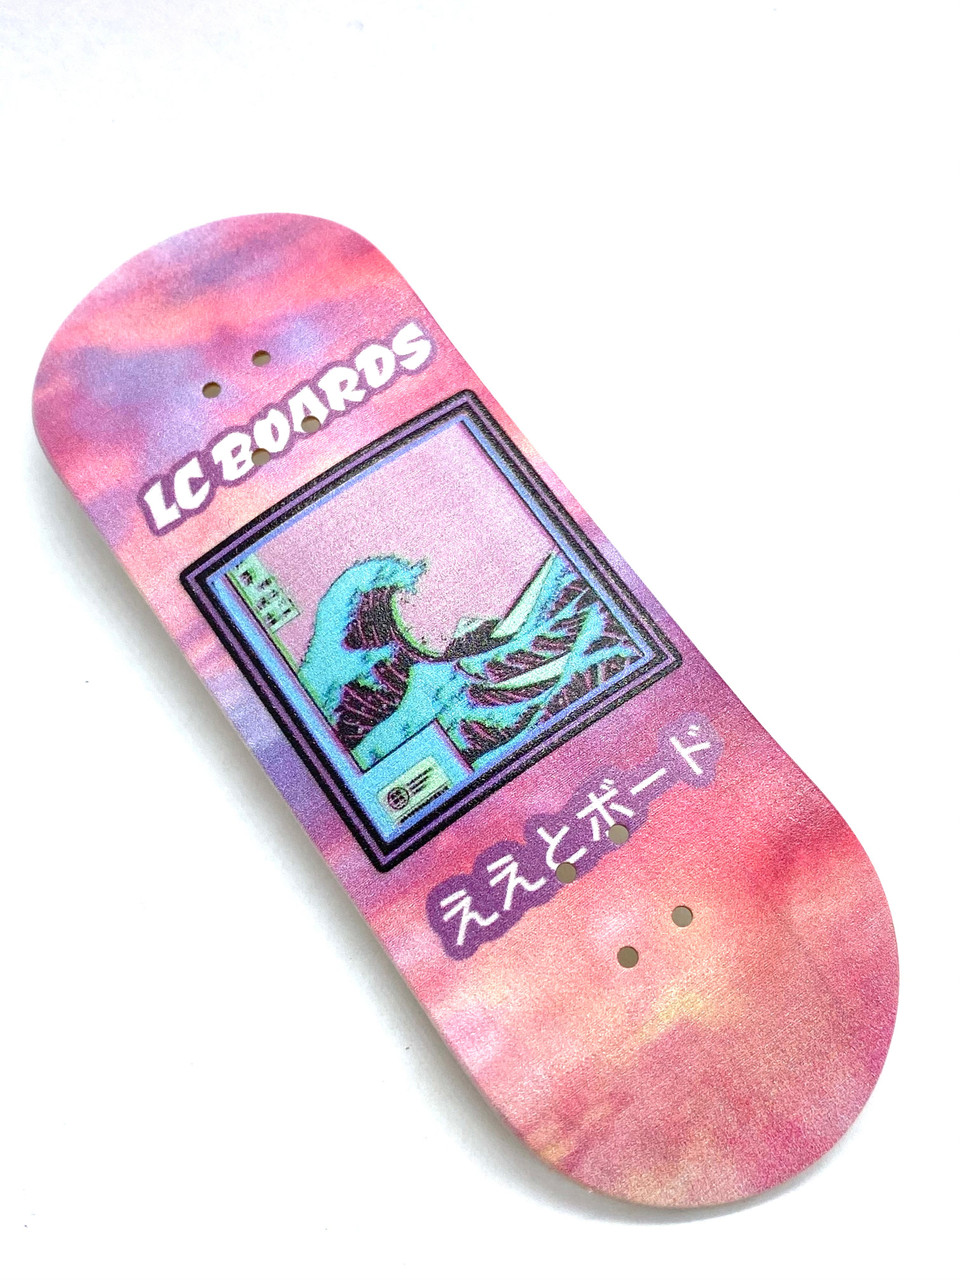 LC BOARDS FINGERBOARD CHEESE WAX